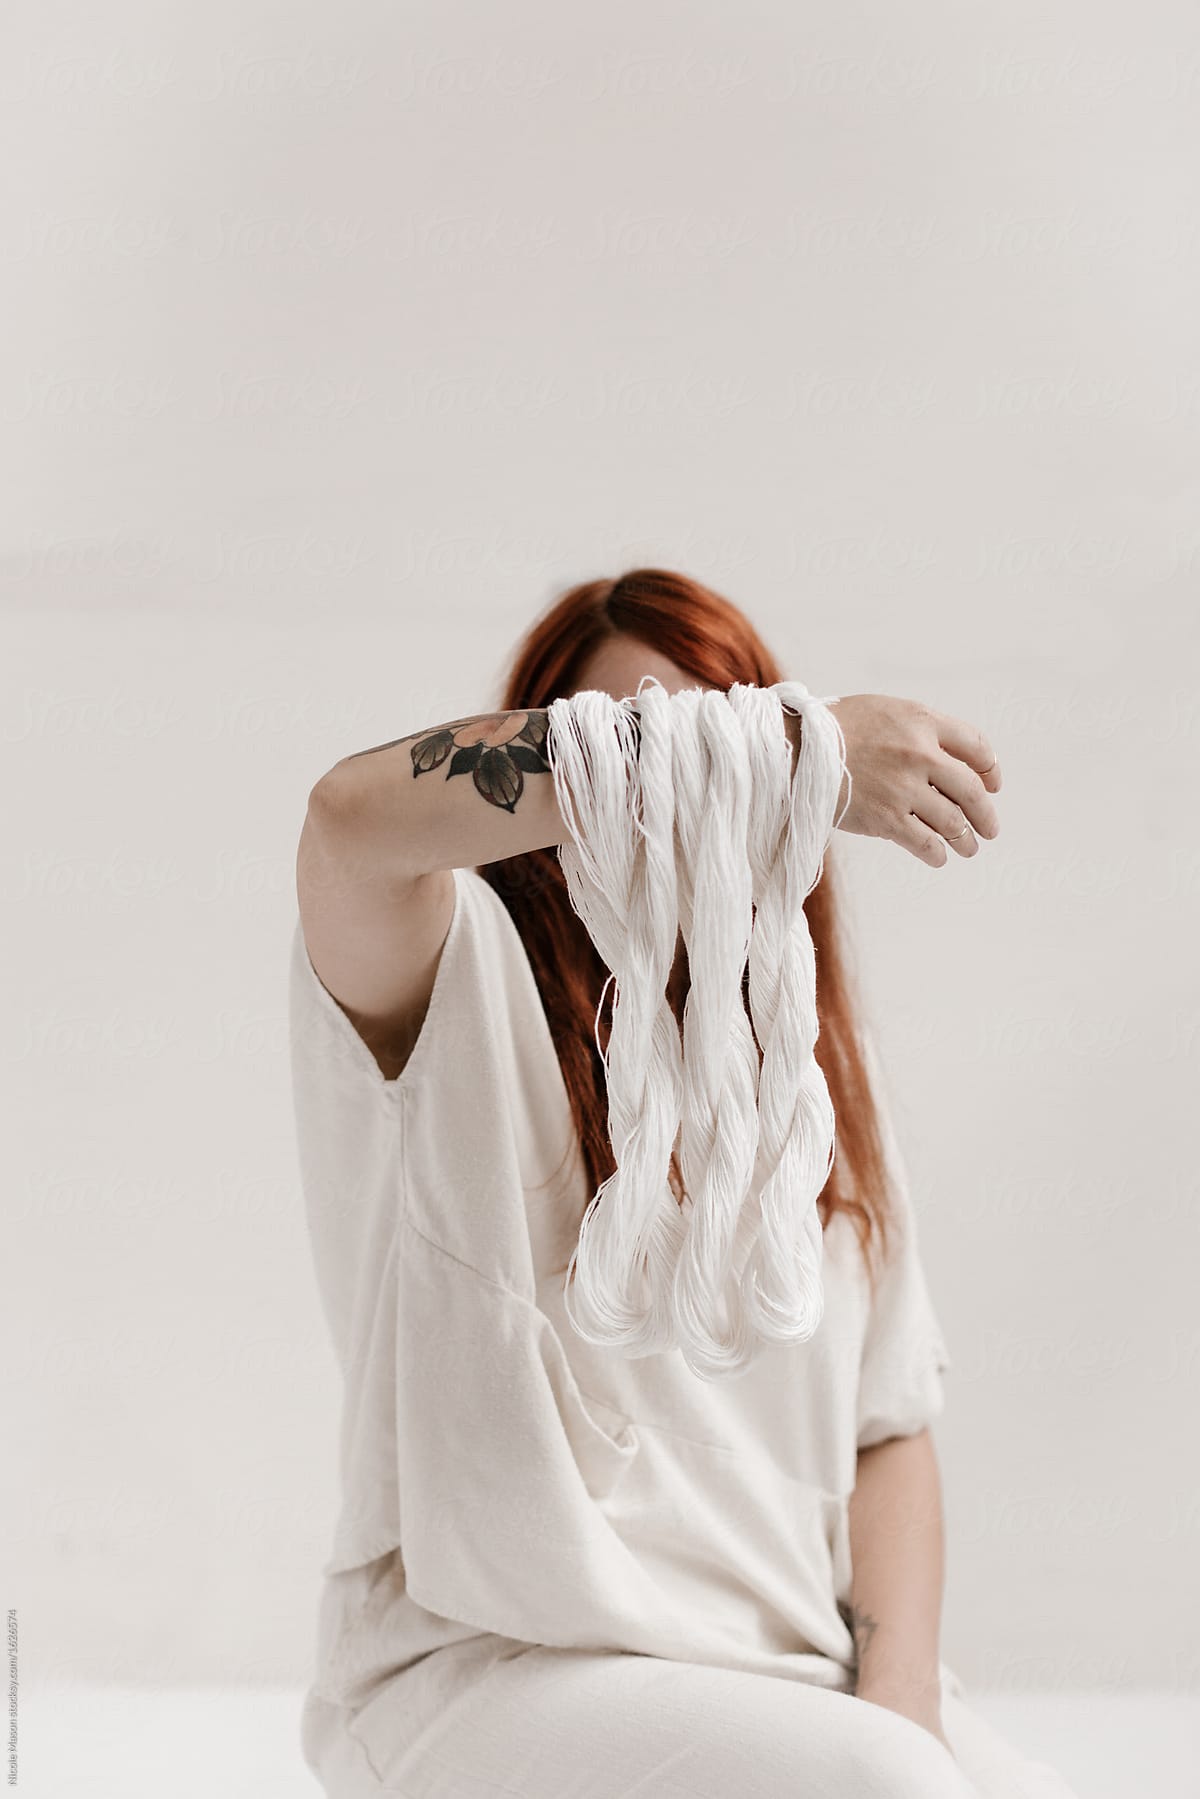 female redhead artist holding three loops of white string in front of face